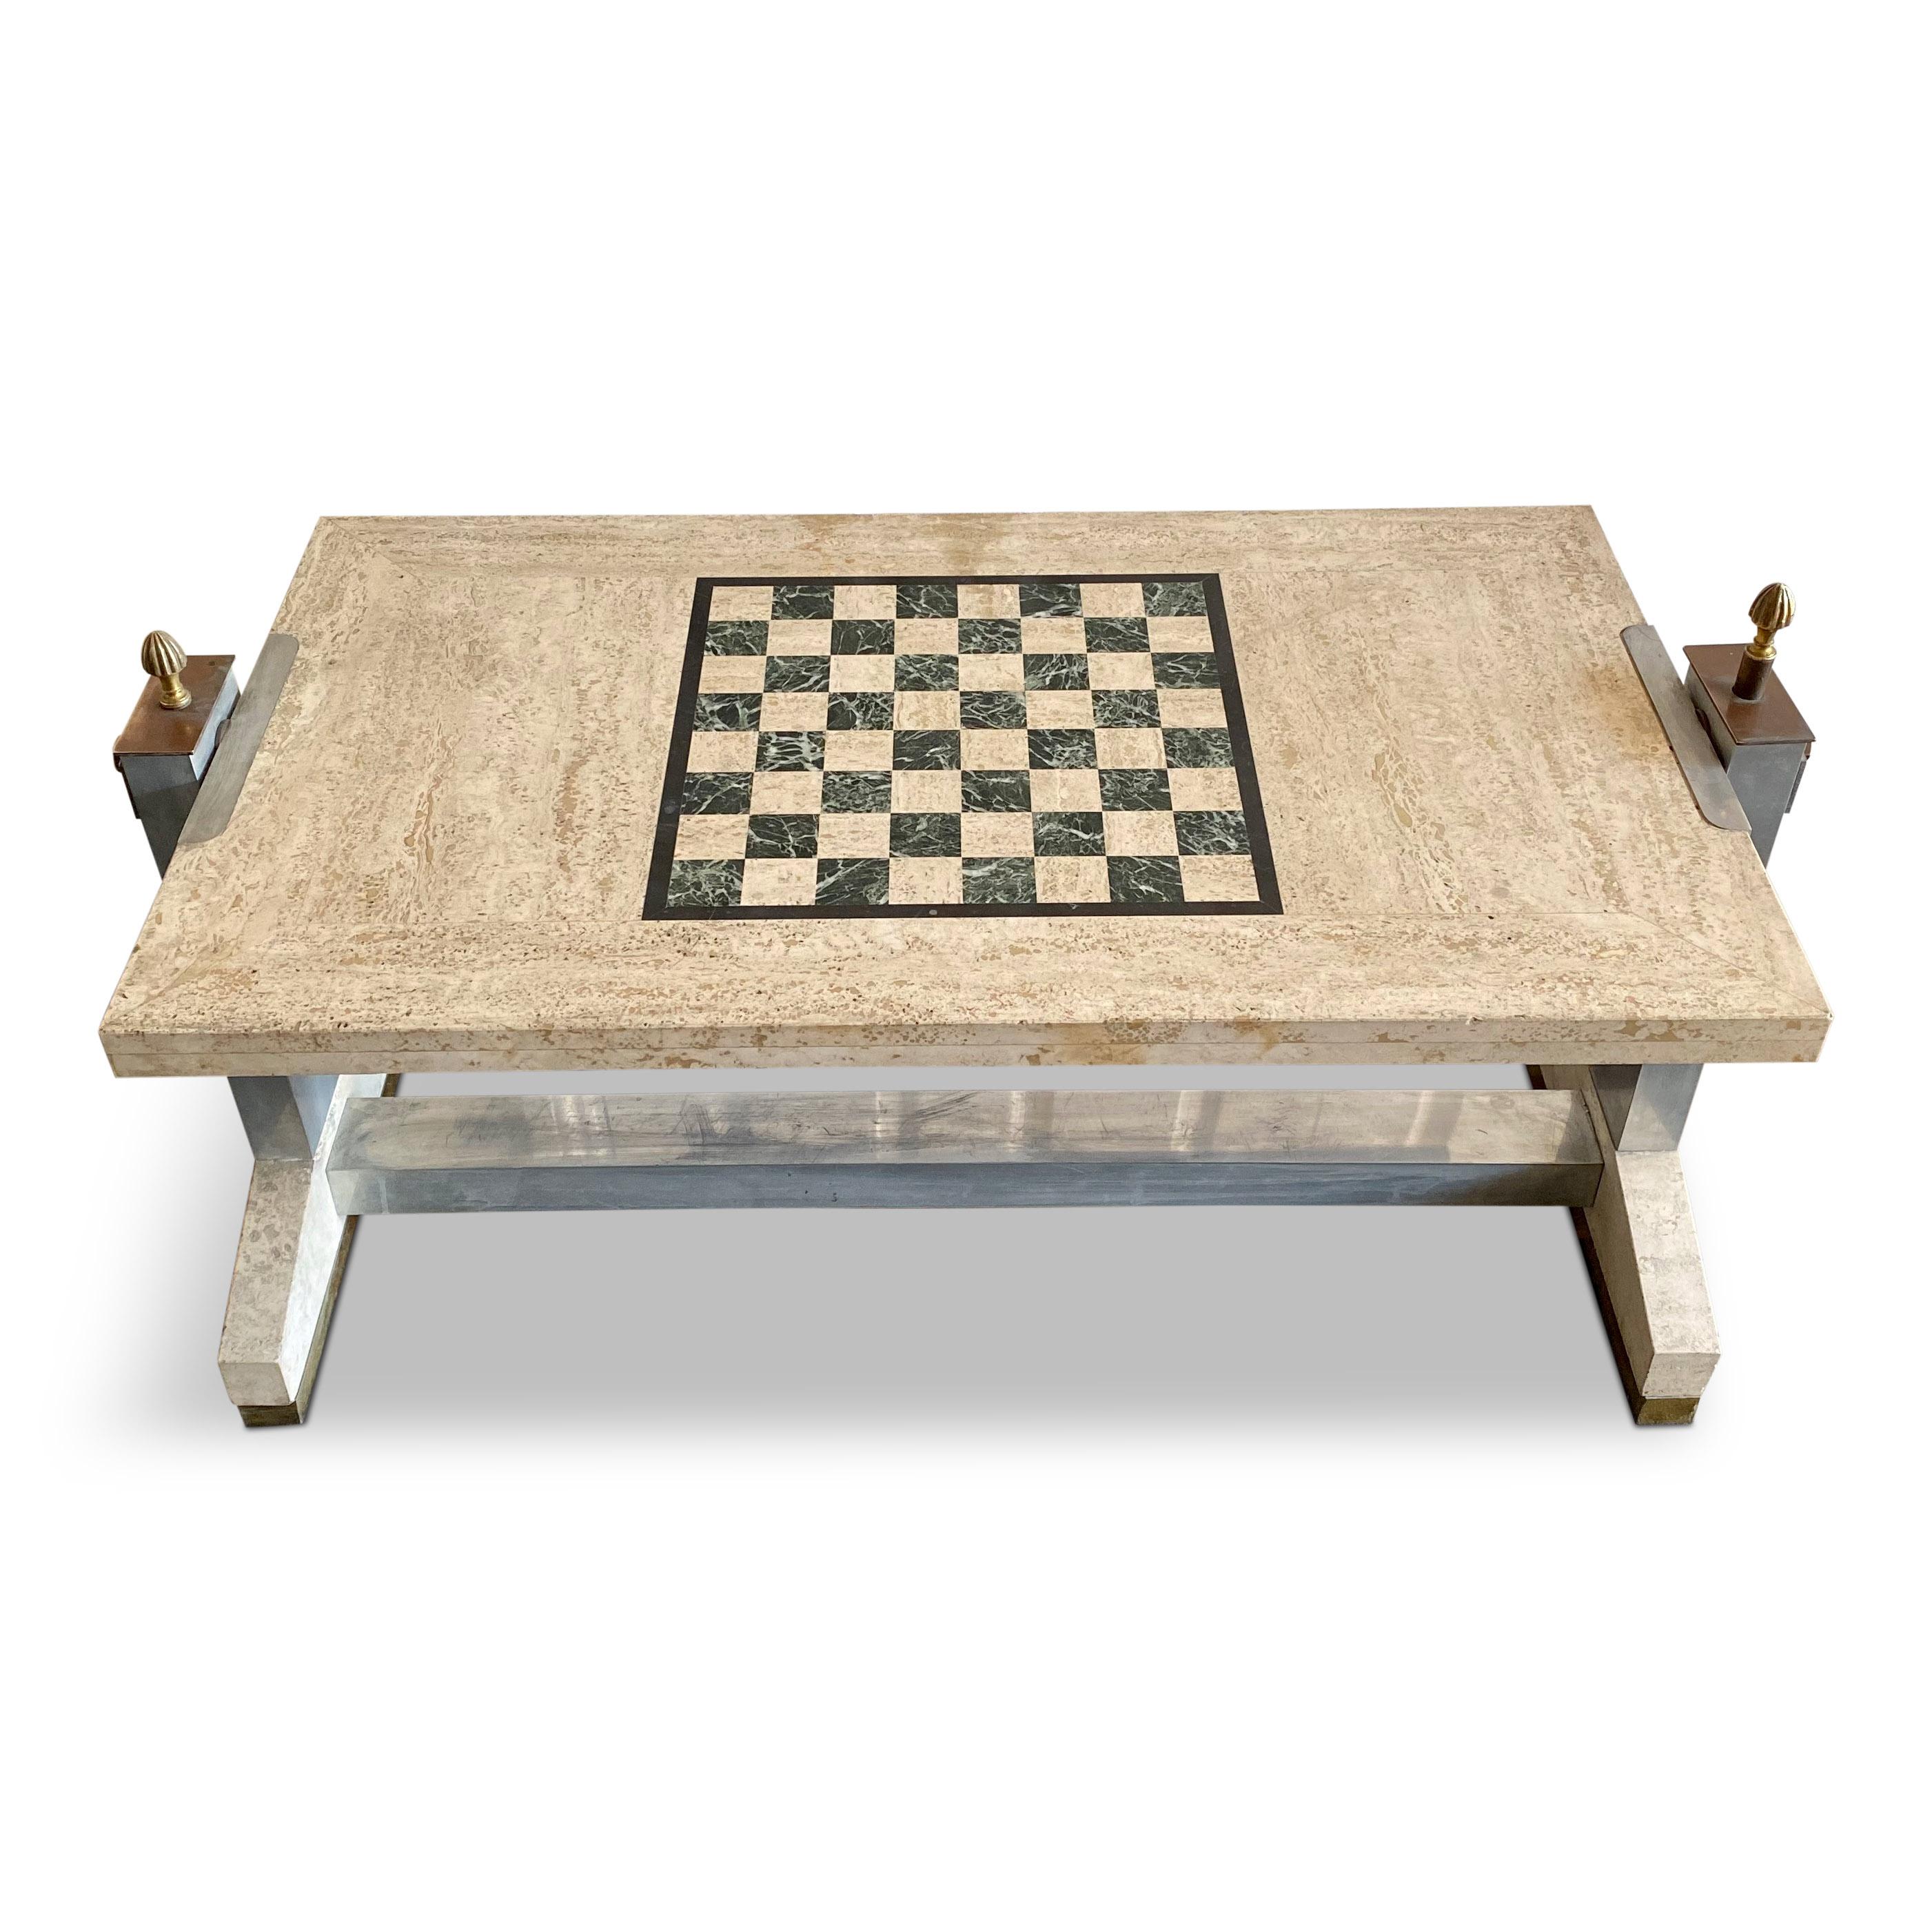 Travertine and chrome games table

Brass and bronze details

Marble inserts

Rotating top with chess on one side and backgammon on the other

Finial locks table in place

Excellent quality

1970s, Italian.